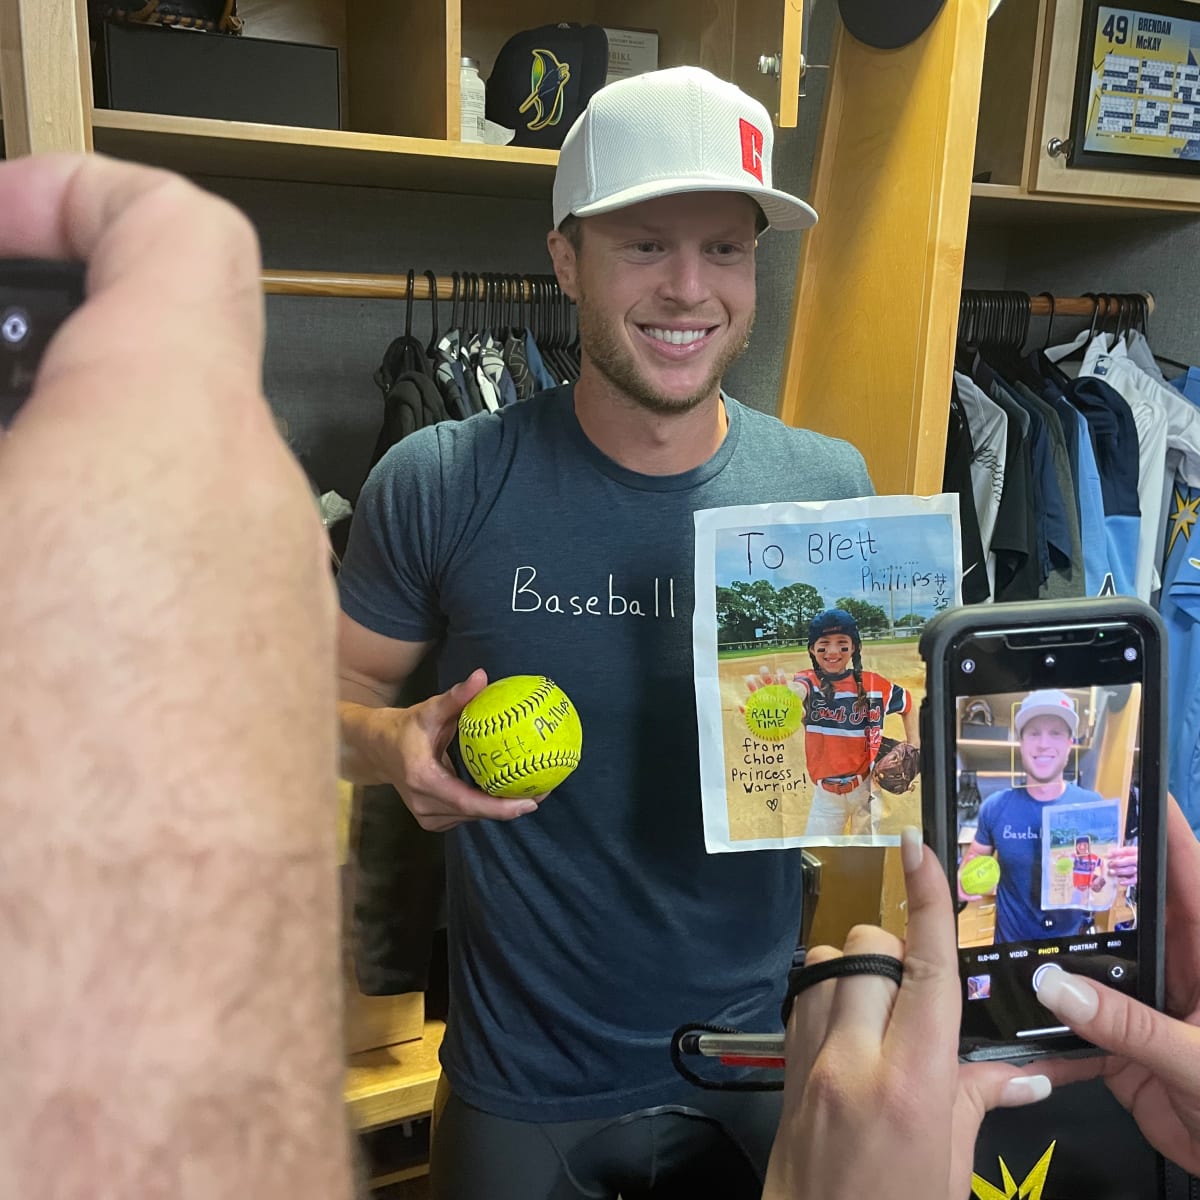 Brett Phillips visited Chloe Grimes, young fan battling cancer, gave her  glove before trade